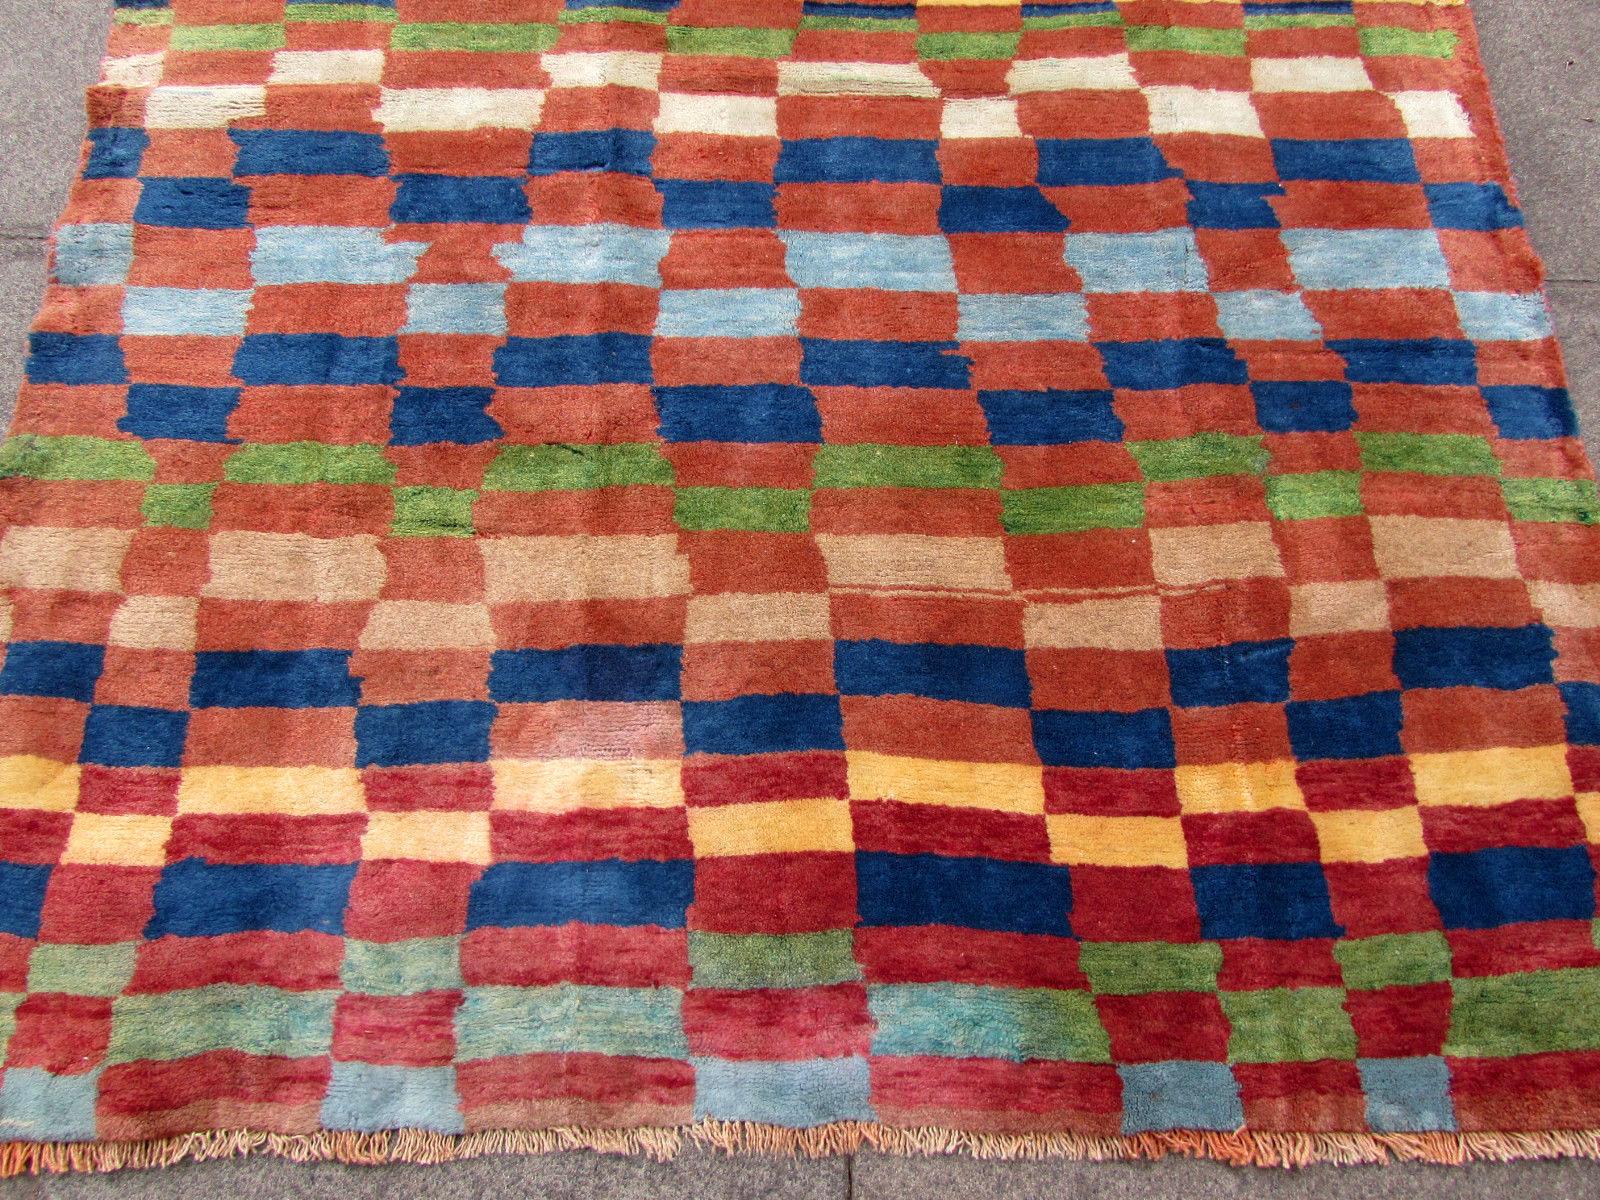 Handmade vintage Gabbeh style rug in geometric design. The rug is from the end of 20th century in original good condition.

- Condition: original good,

- circa 1970s,

- Size: 4.7' x 6.4' (137cm x 190cm),

- Material: wool,

- Country of